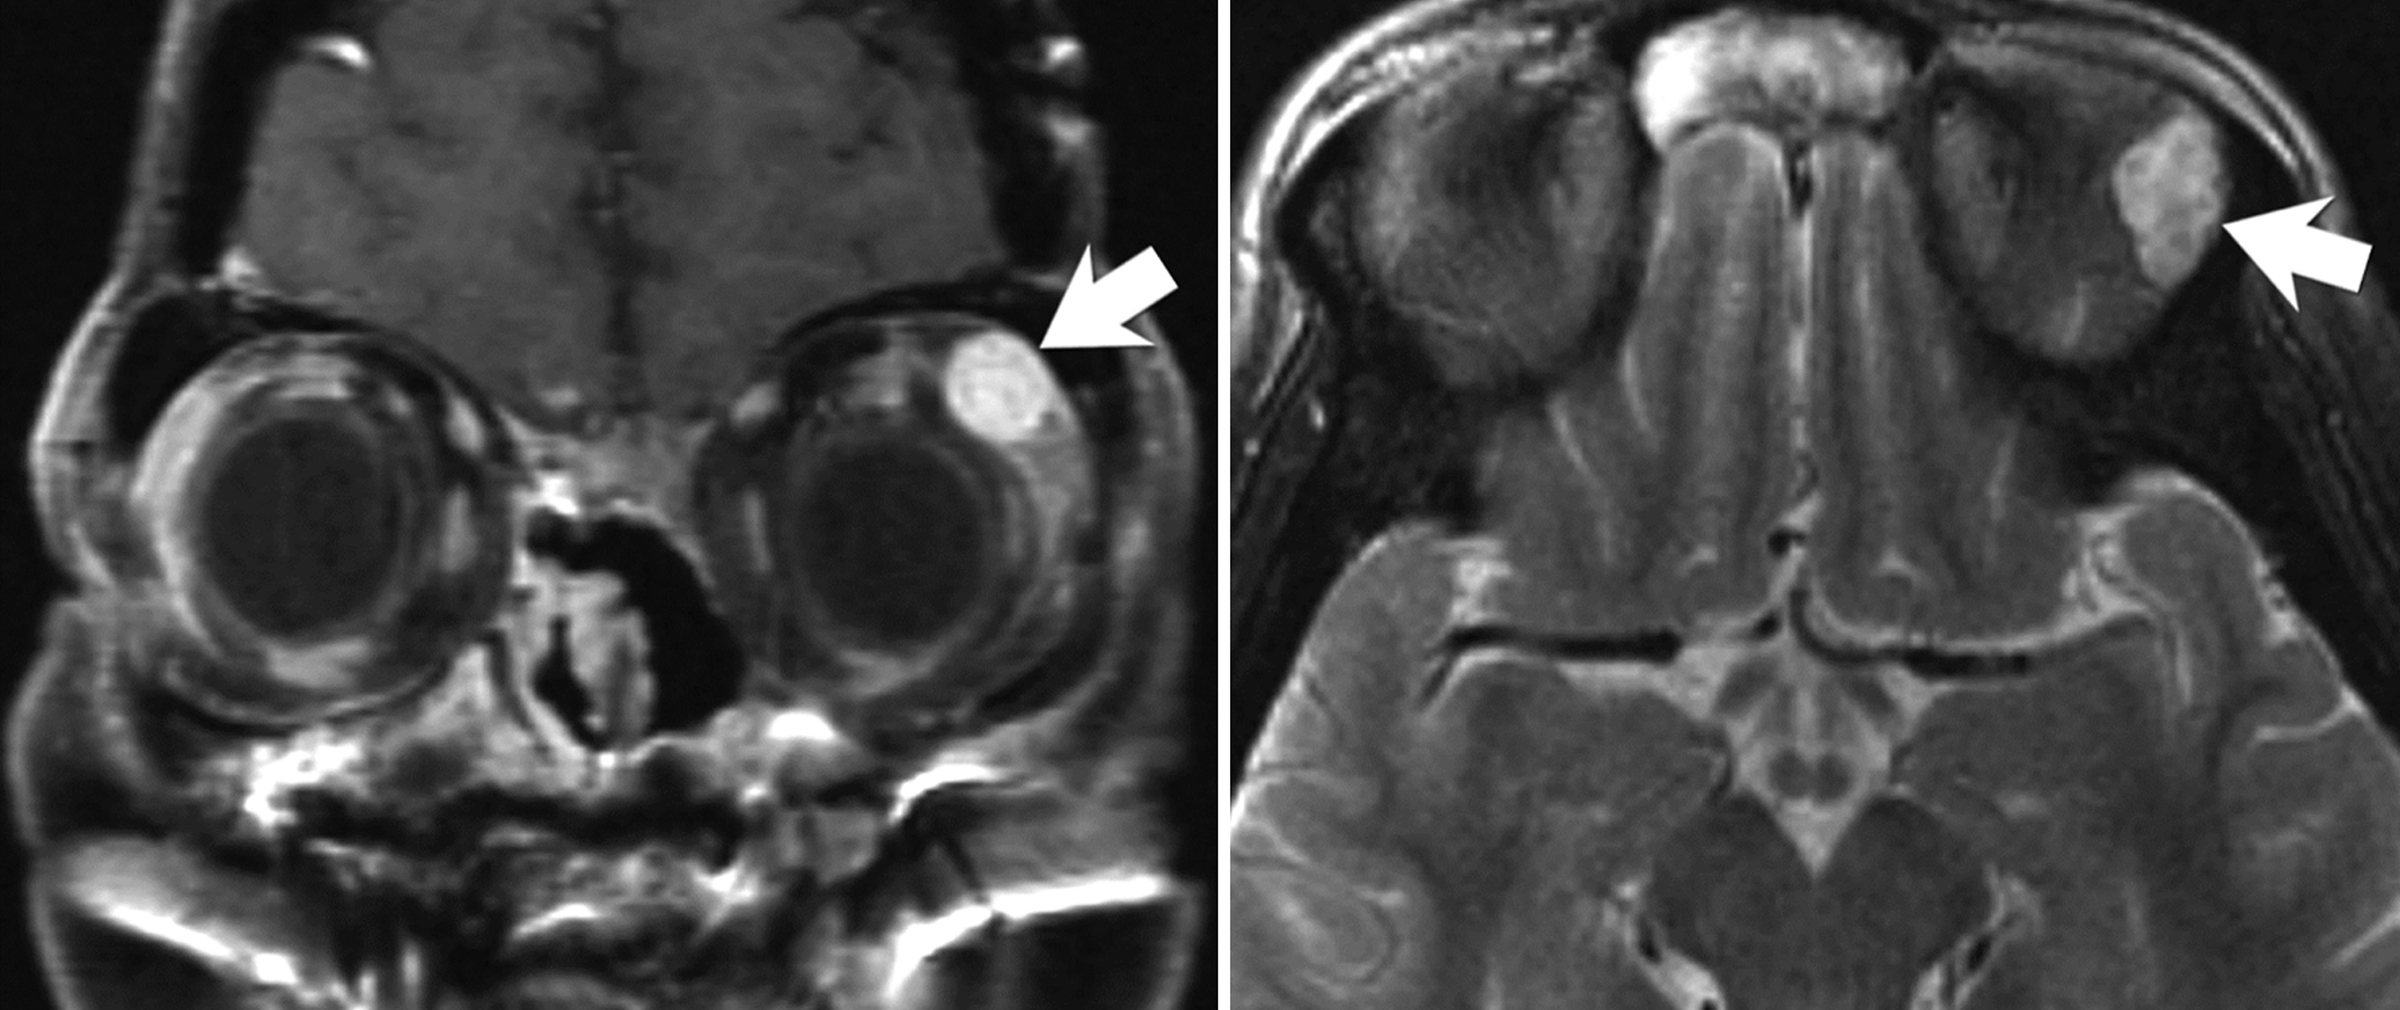 A 60-year-old woman with an asymptomatic left lacrimal gland mass found incidentally